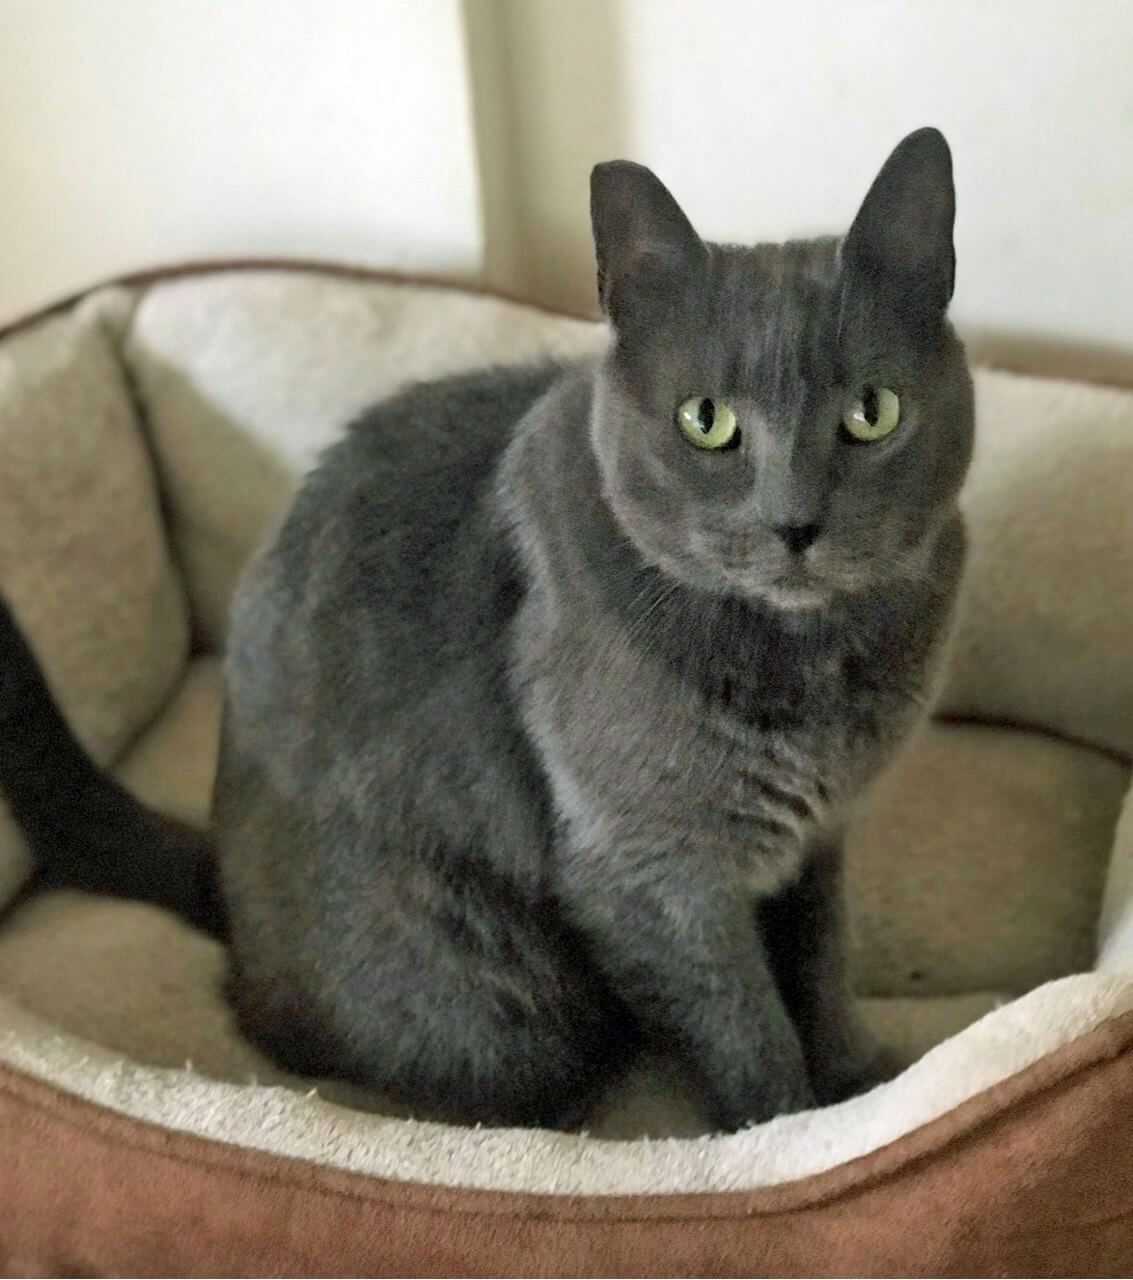 ms grey the rescued cat in her bed